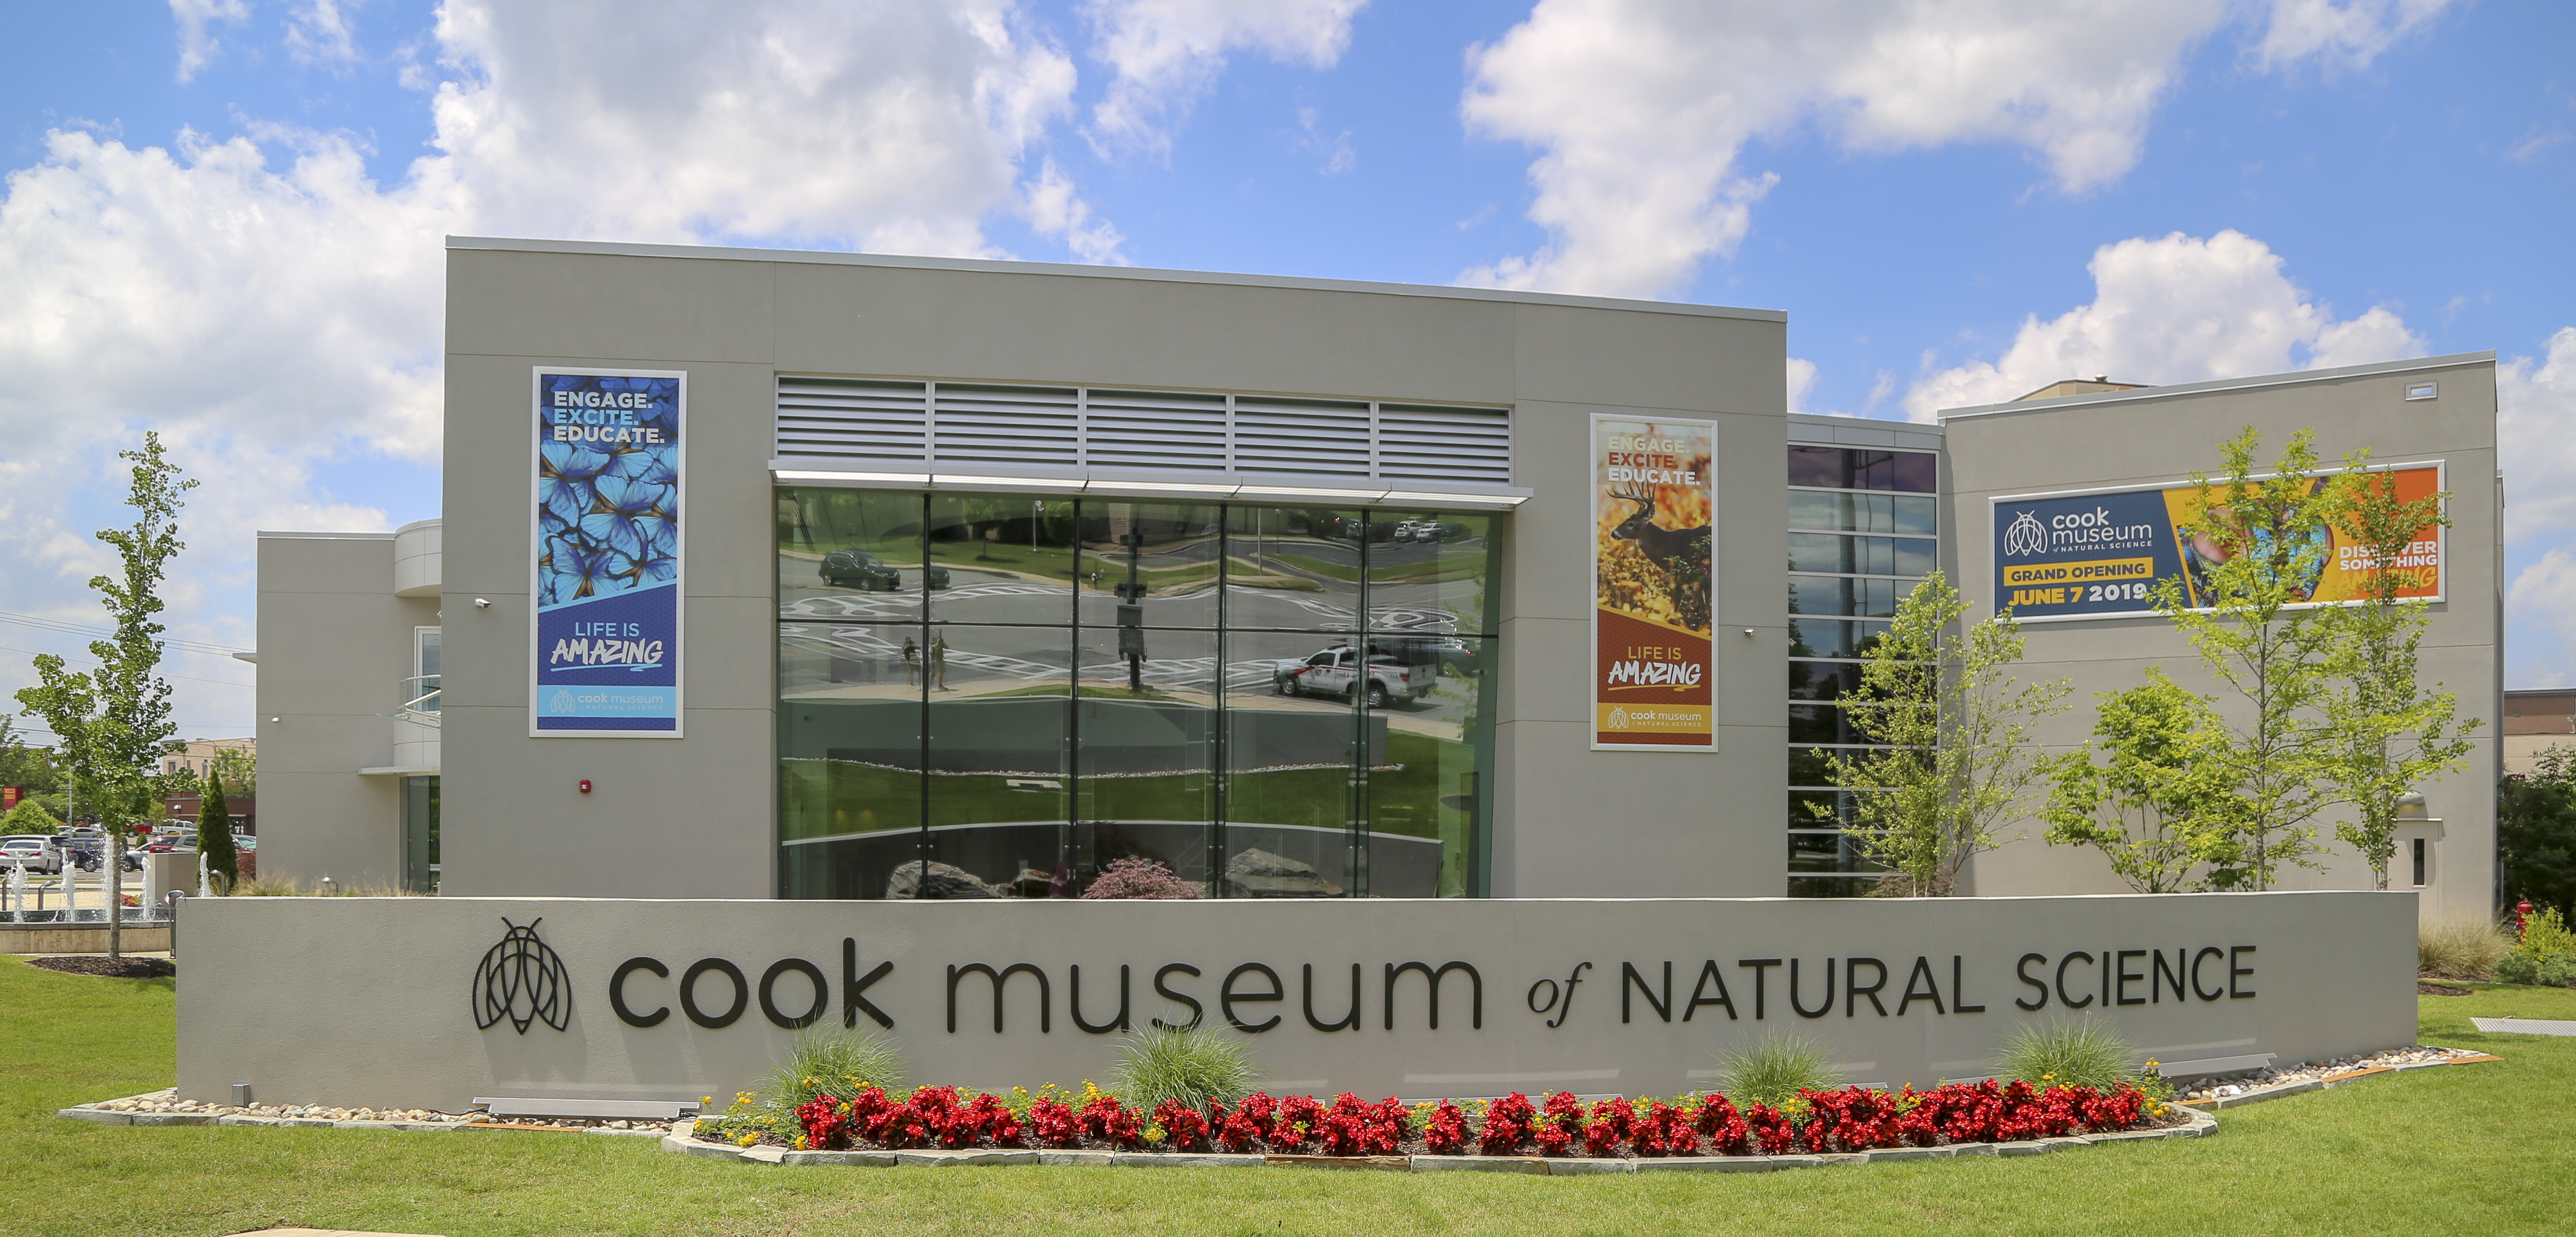 Outside view of the Cook Museum of Natural Science